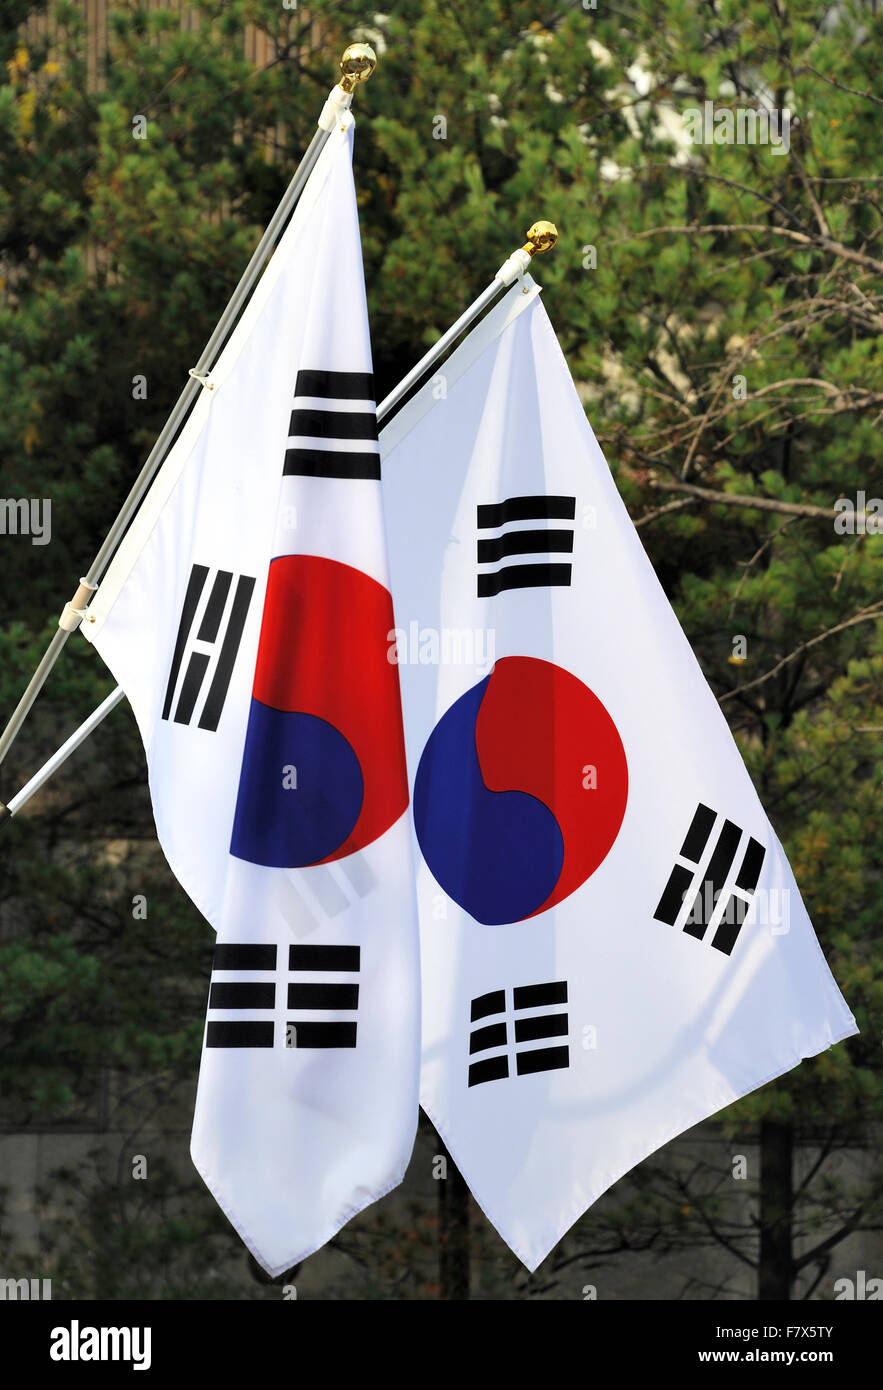 The national flag of South Korea. It has three parts: a white background, a red and blue Taeguk, which is a red and blue Taiji Stock Photo